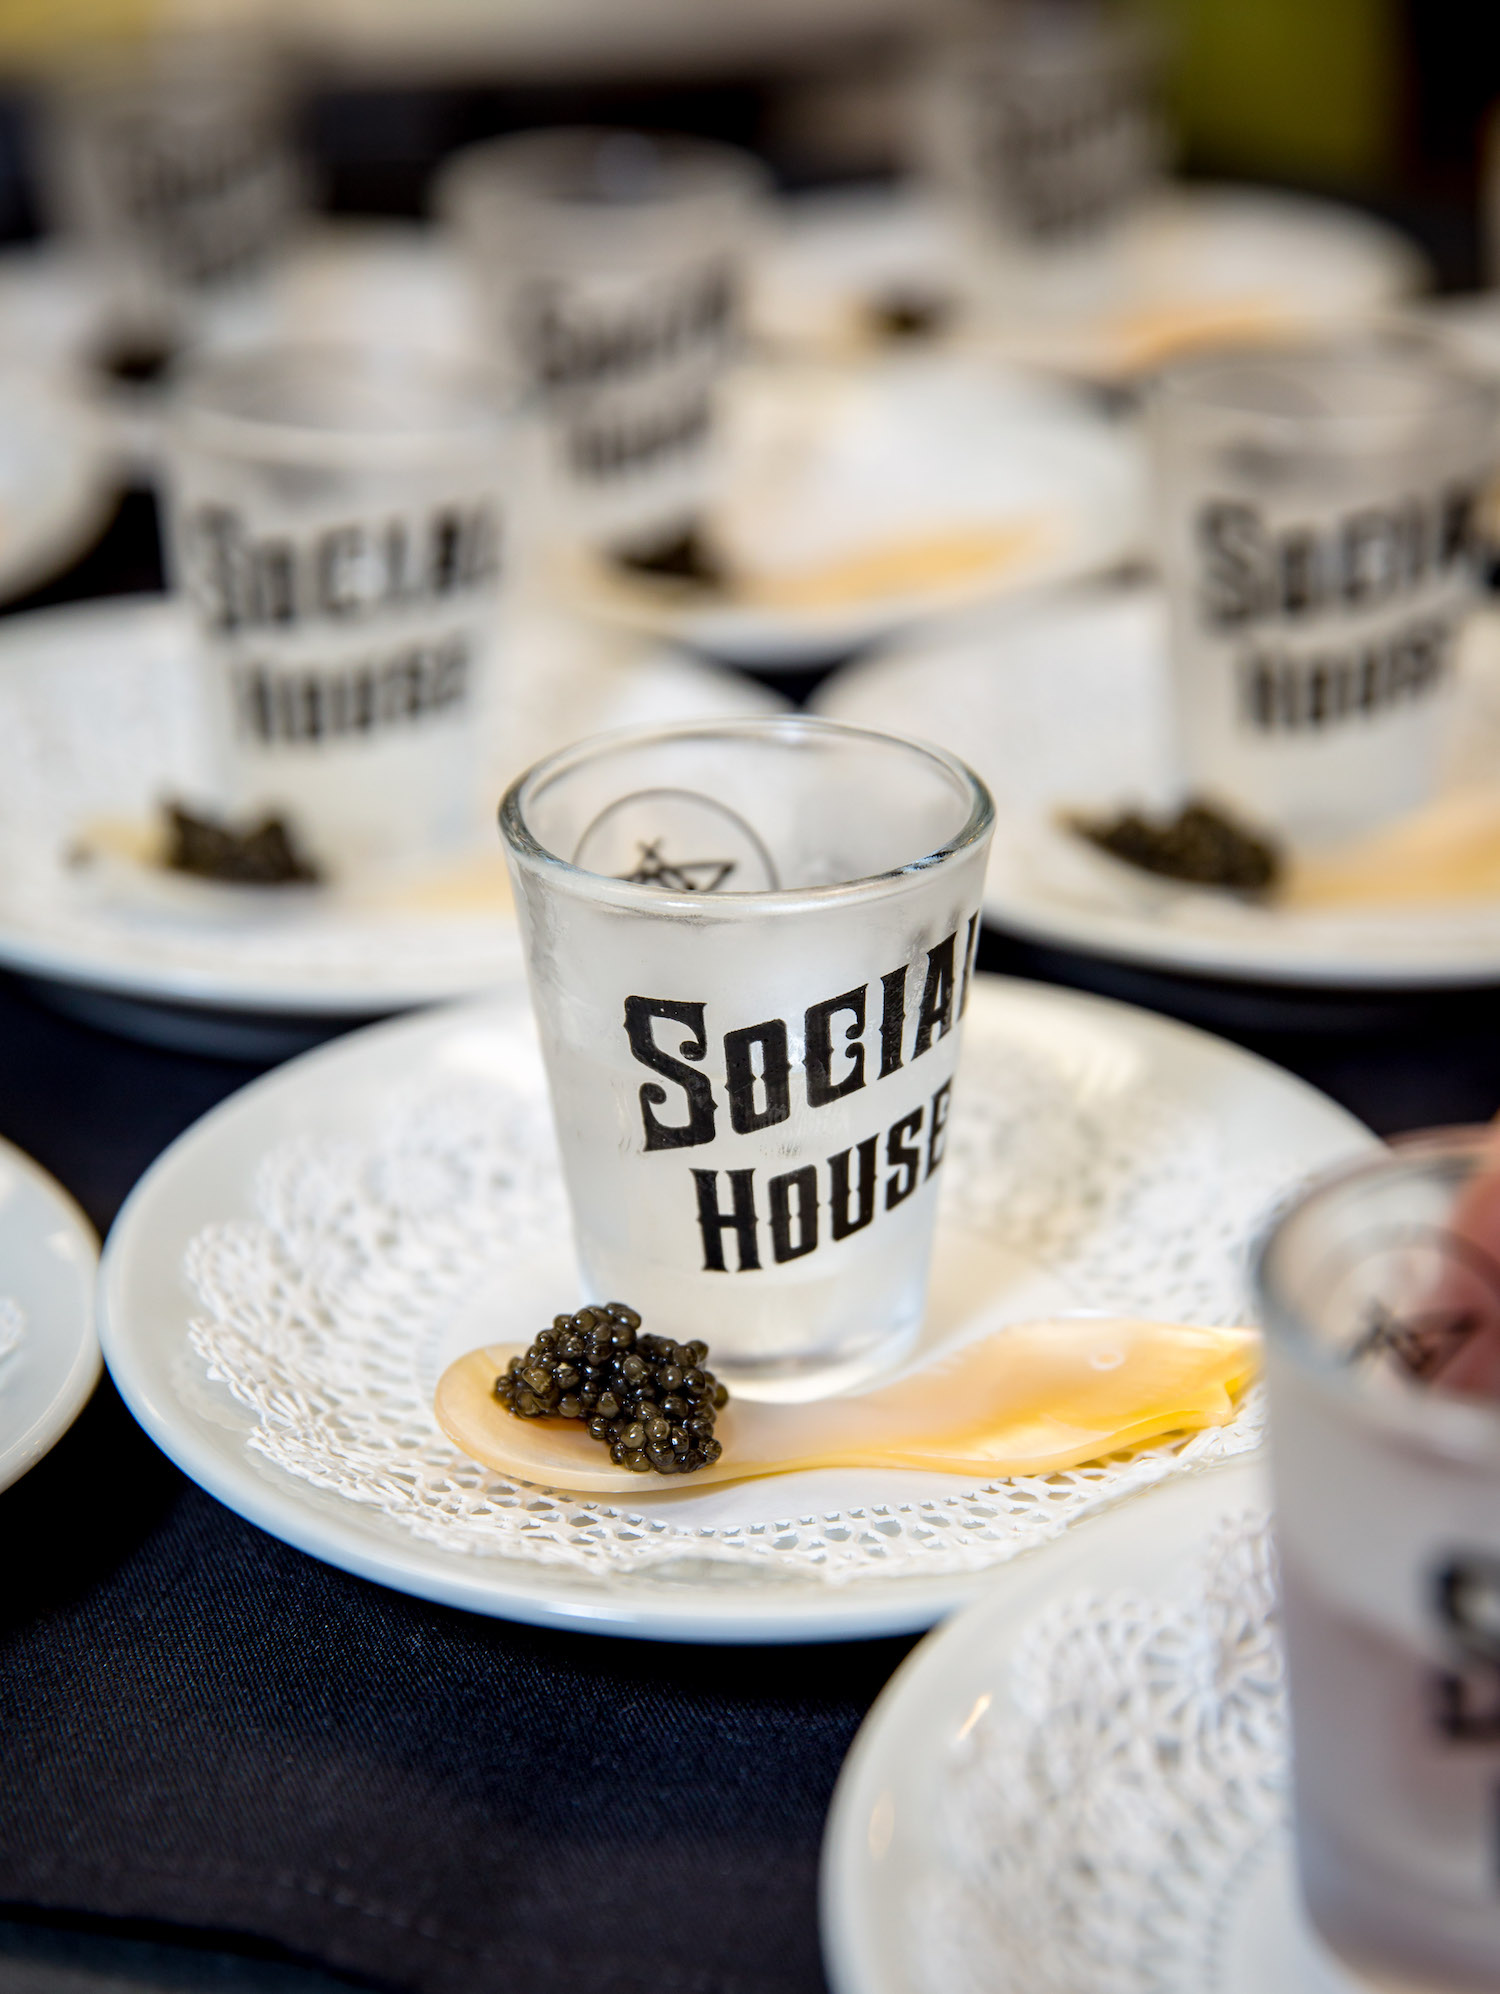 A social house shot glass sits on a plate.